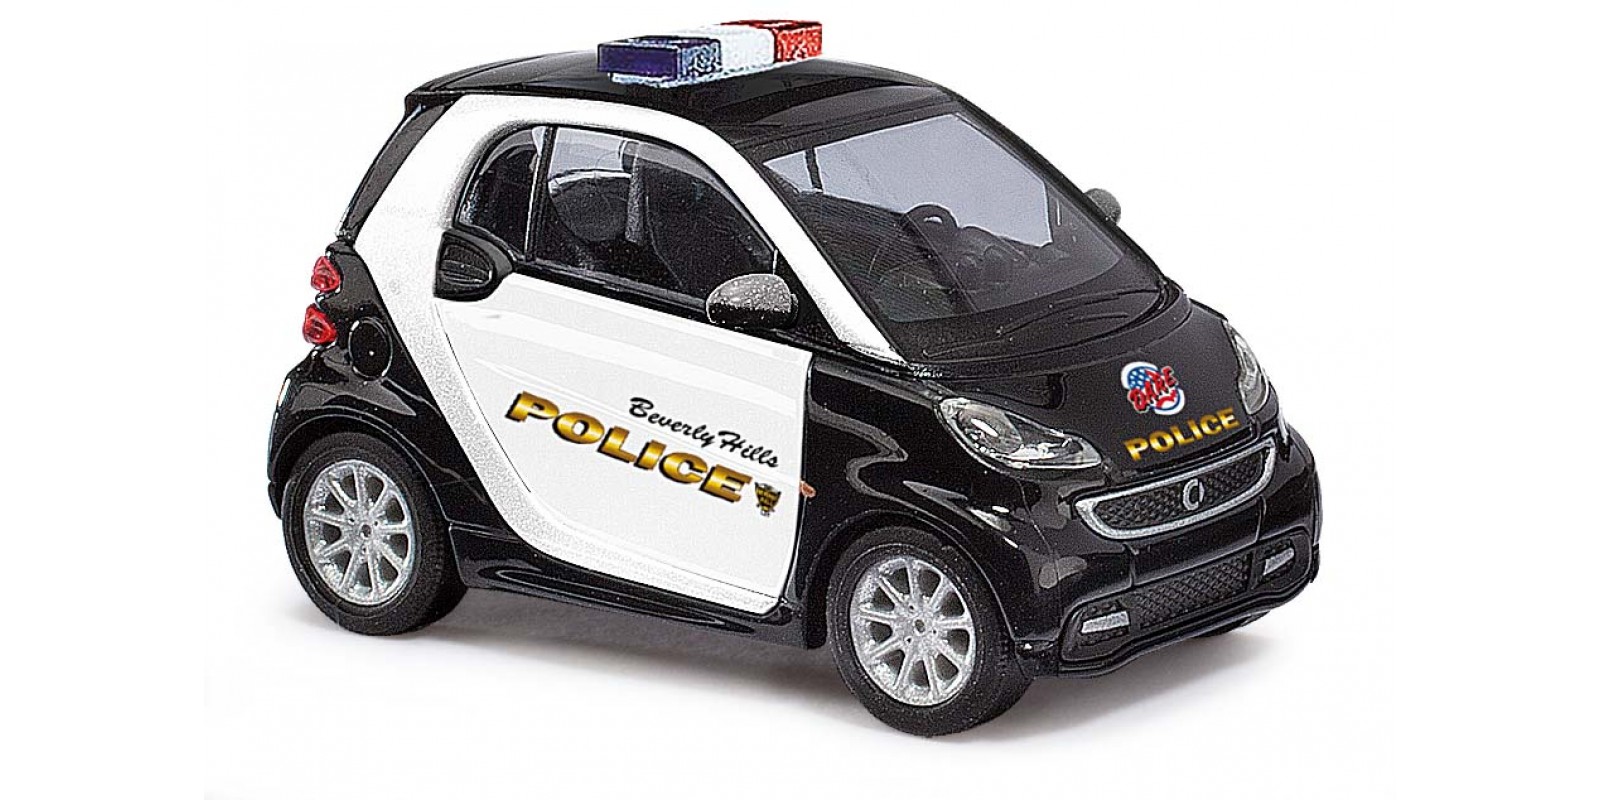 BU46223 Smart Fortwo 2012, Beverly Hills Police